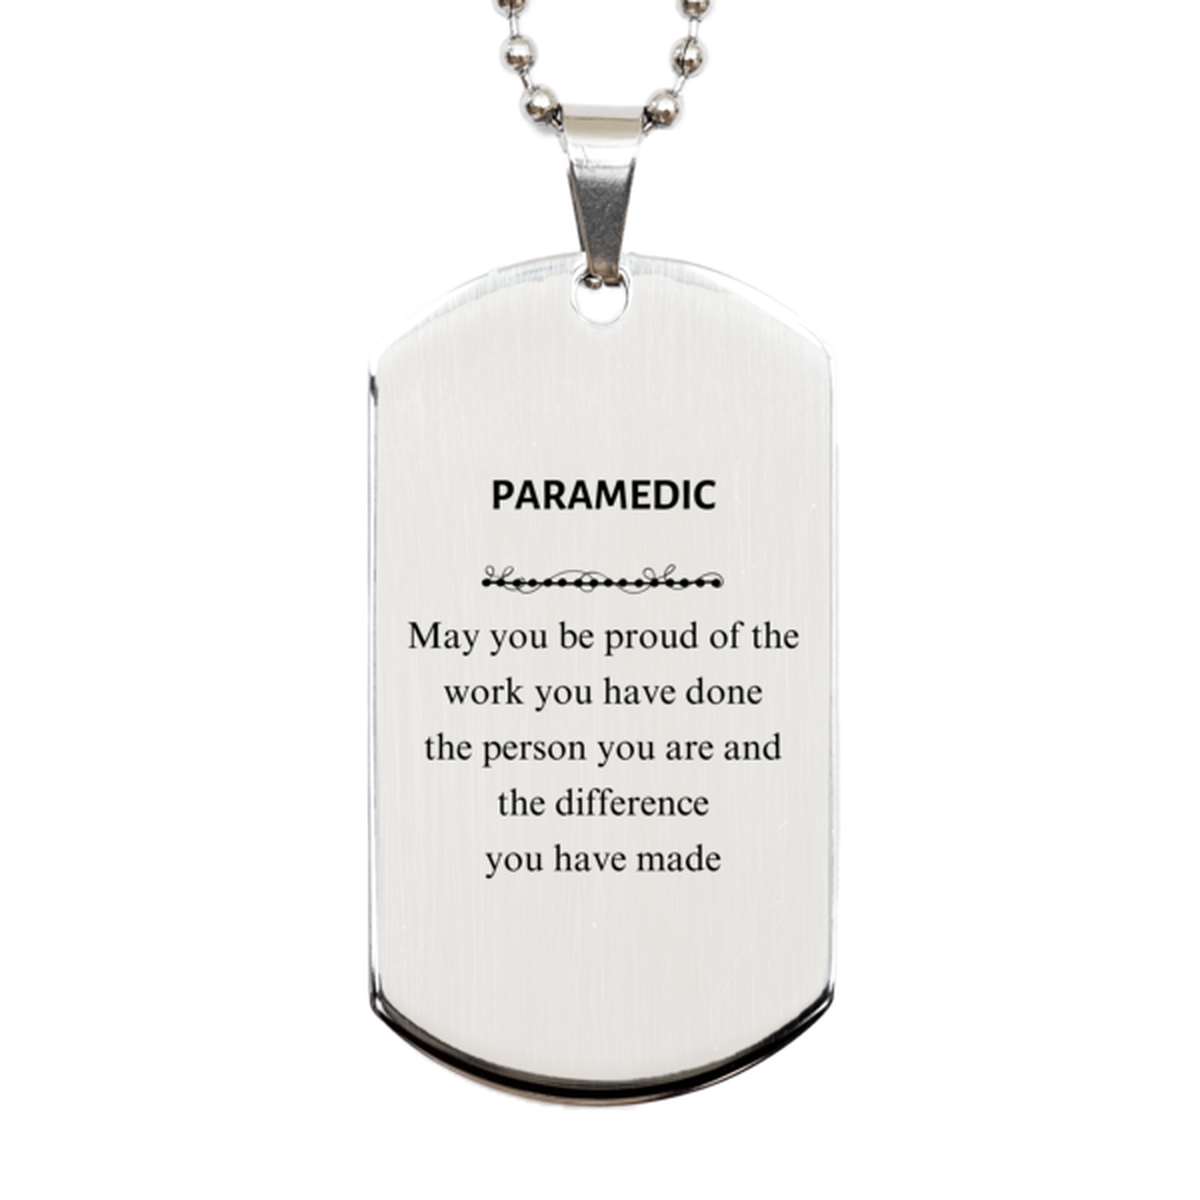 Paramedic May you be proud of the work you have done, Retirement Paramedic Silver Dog Tag for Colleague Appreciation Gifts Amazing for Paramedic